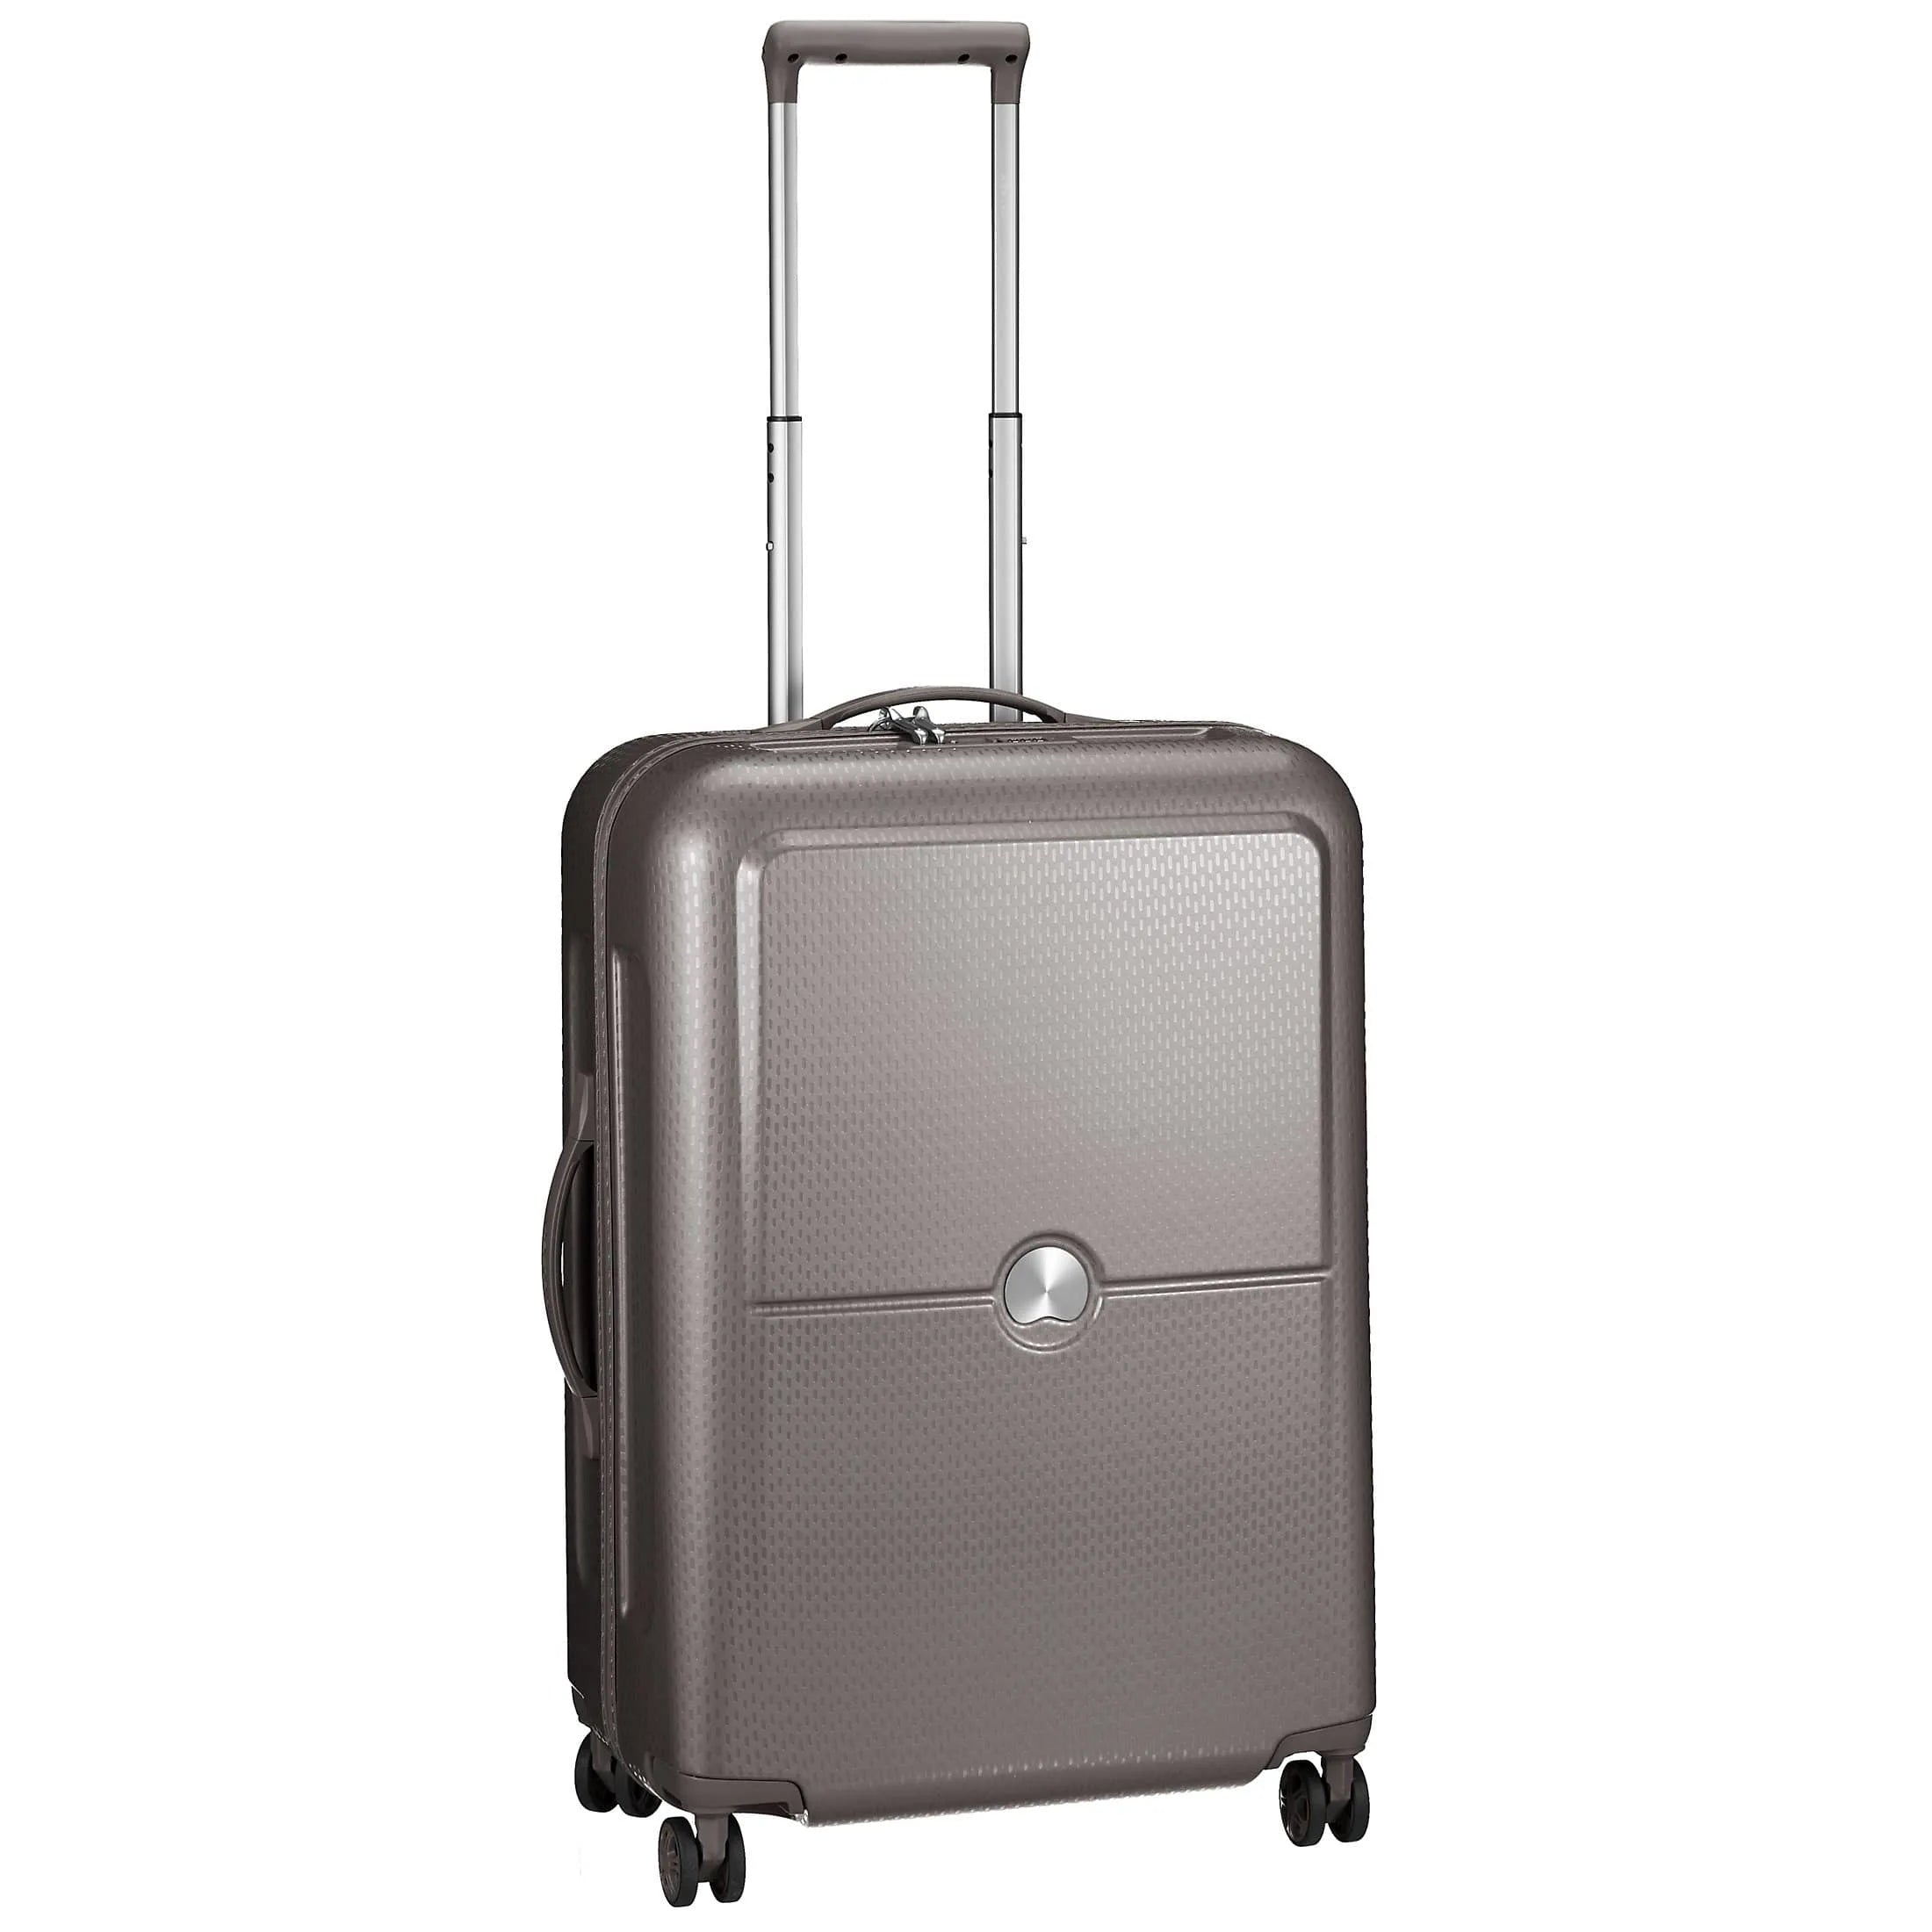 Delsey Turenne trolley 4 roues 65 cm - argent